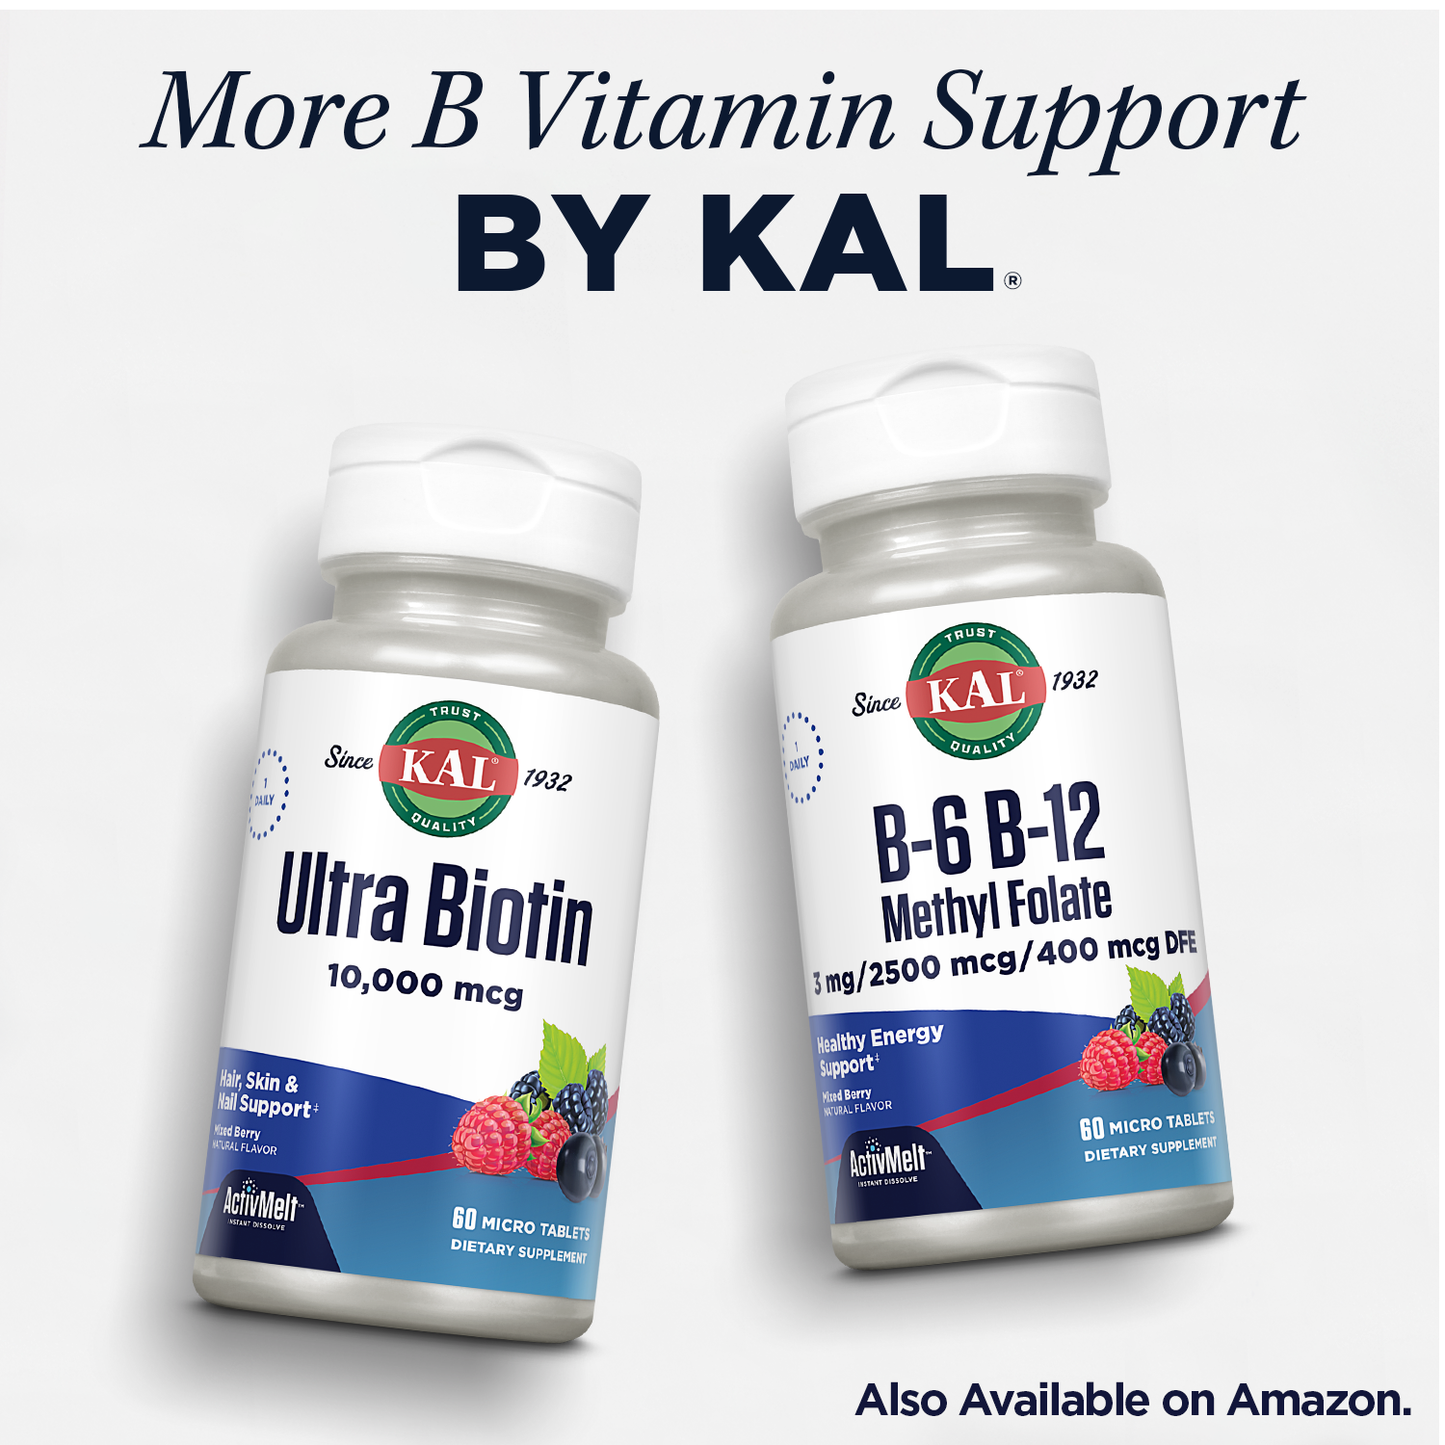 KAL CoEnzyme Vitamin B Complex, Chewable B Vitamins for Healthy Energy, Red Blood Cell and Nerve Function Support w/ Vitamin B12, B6, Folic Acid, Natural Cocoa Mint, Vegan, Sugar Free, 30 Serv, 60ct